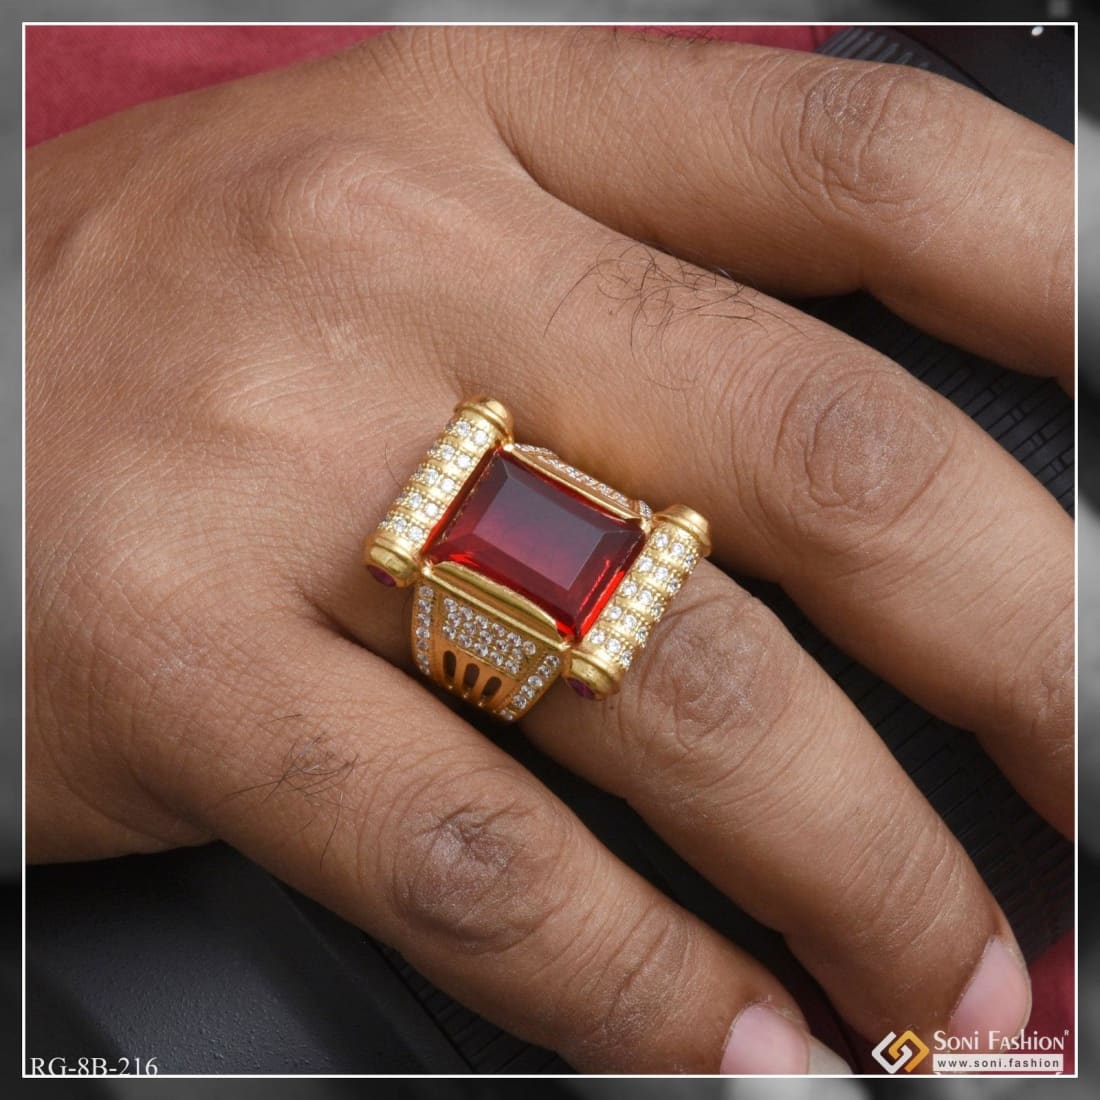 Samriddhi Creations Red Diamond Ring Price Starting From Rs 3,800 | Find  Verified Sellers at Justdial